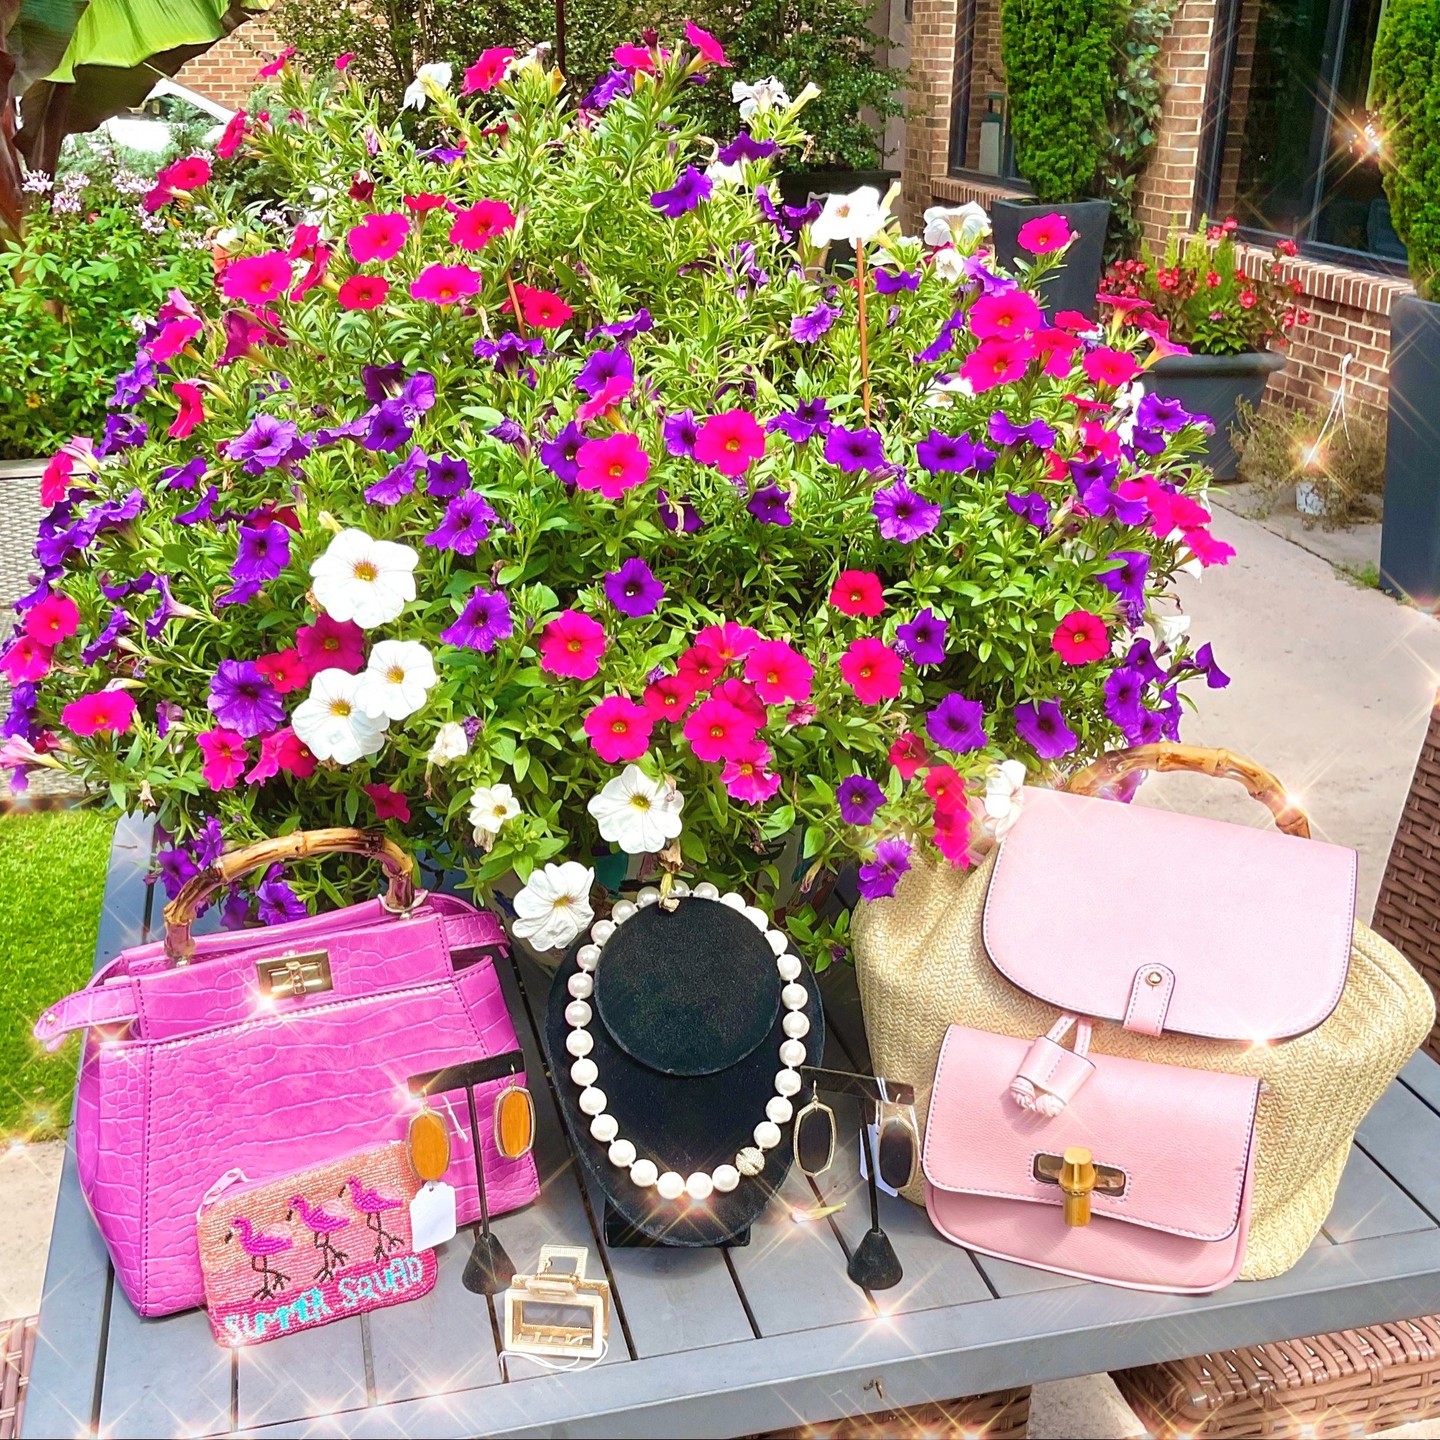 Looking for your go to summer accessories? Come shop our NEW summer finds!